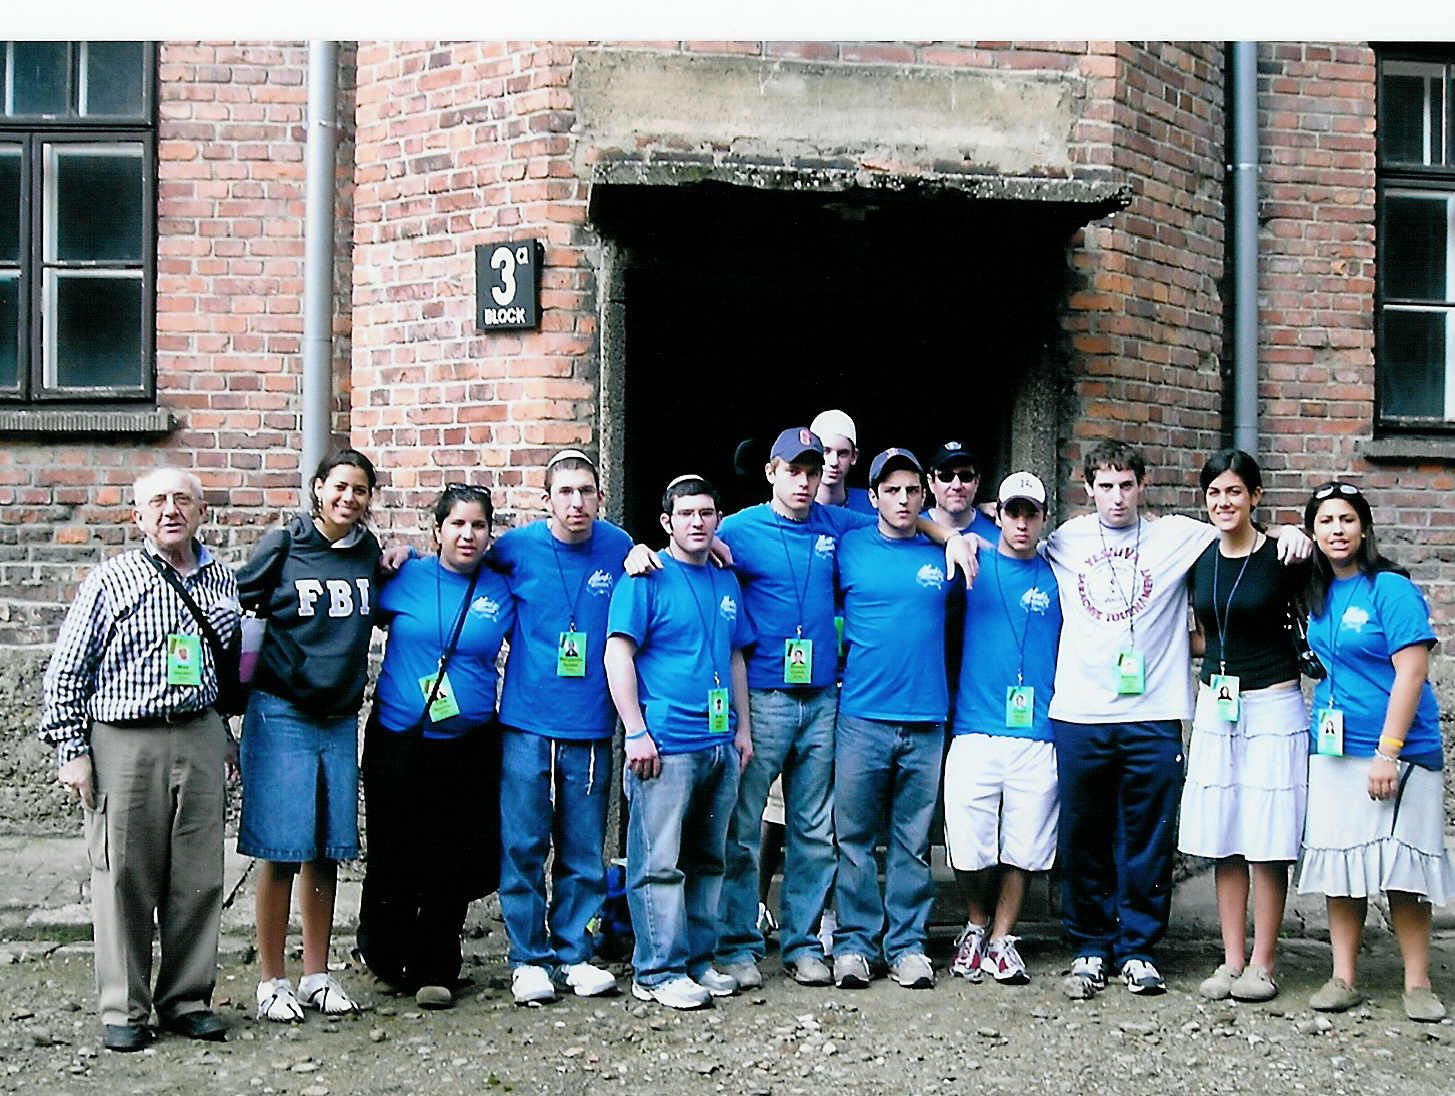 An undated photo taken in roughly 2005; Yavneh Academy's March of the Living participants, (from left to right) Rachelle Krasoff, Tina Newman, Benjamin Epstein, Ben Fine, Simon Chafetz, Shane Lazarus, Jeremy Issakarian, Mike Zucker, Chad Davis, Benny Fried, Eliza Lavi and Abby Coben, with Max Glauben, (far left) at Auschwitz. 
